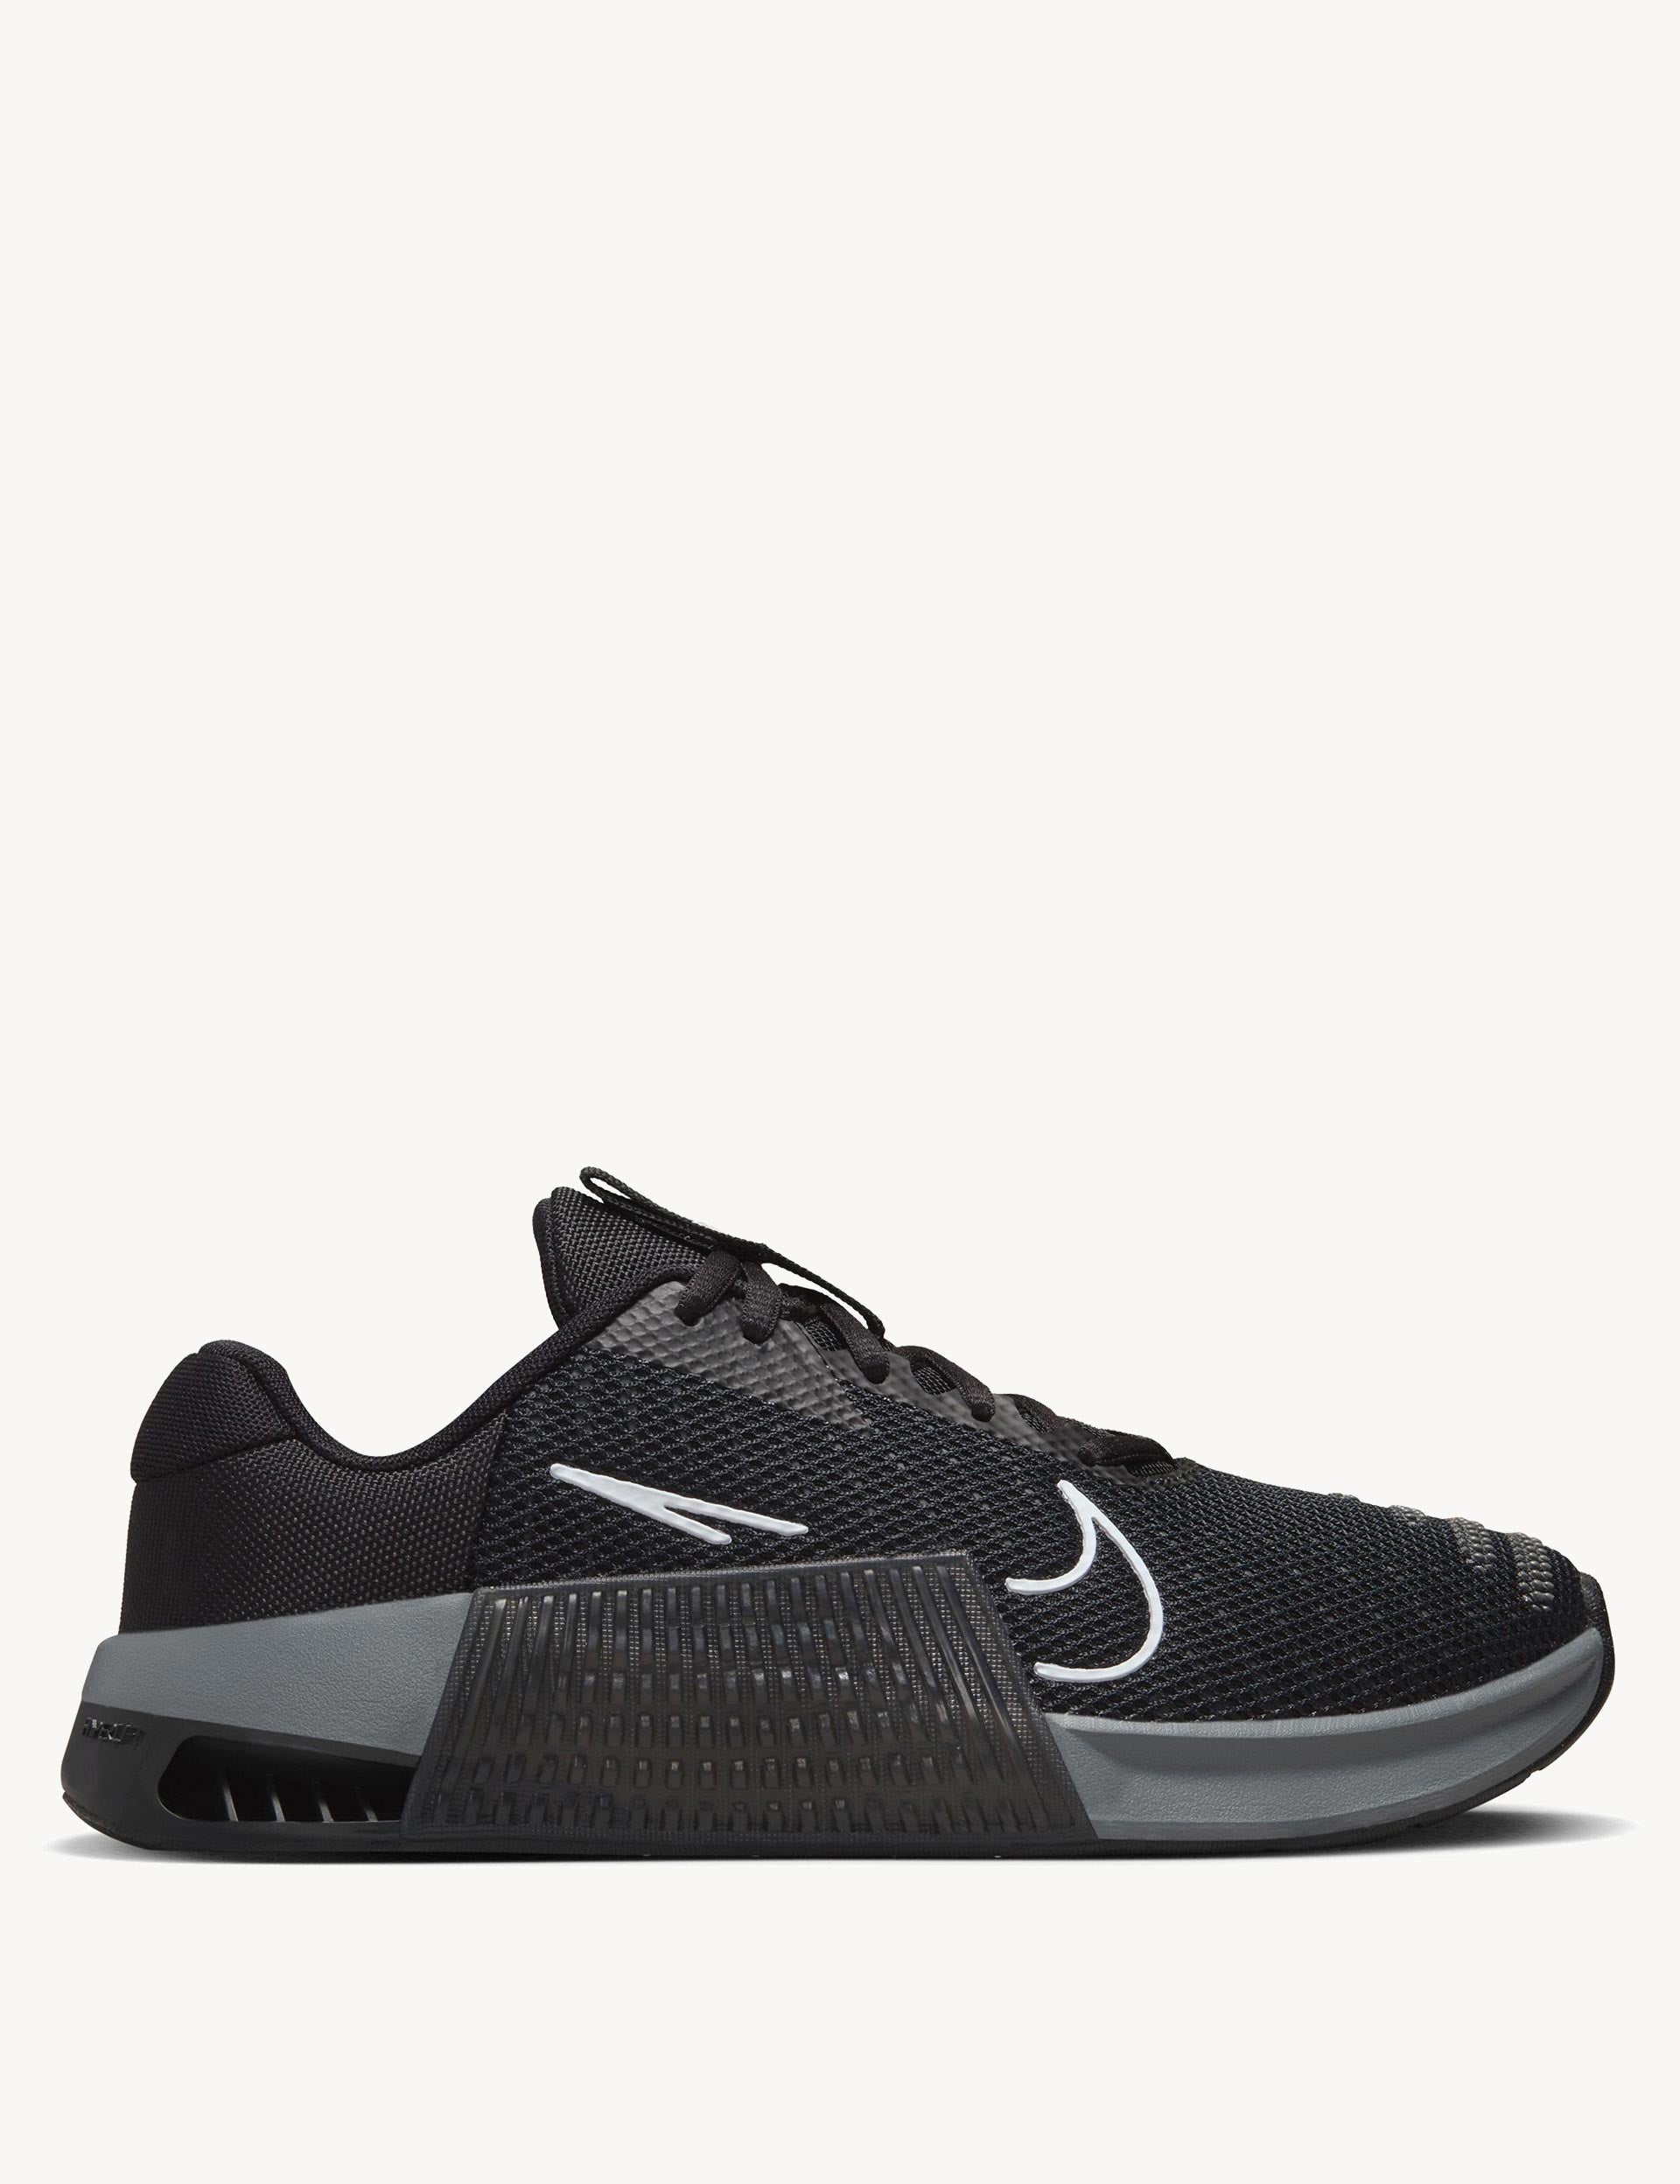 Nike | Metcon 9 Shoes - Black/Anthracite/Grey/White | The Sports Edit